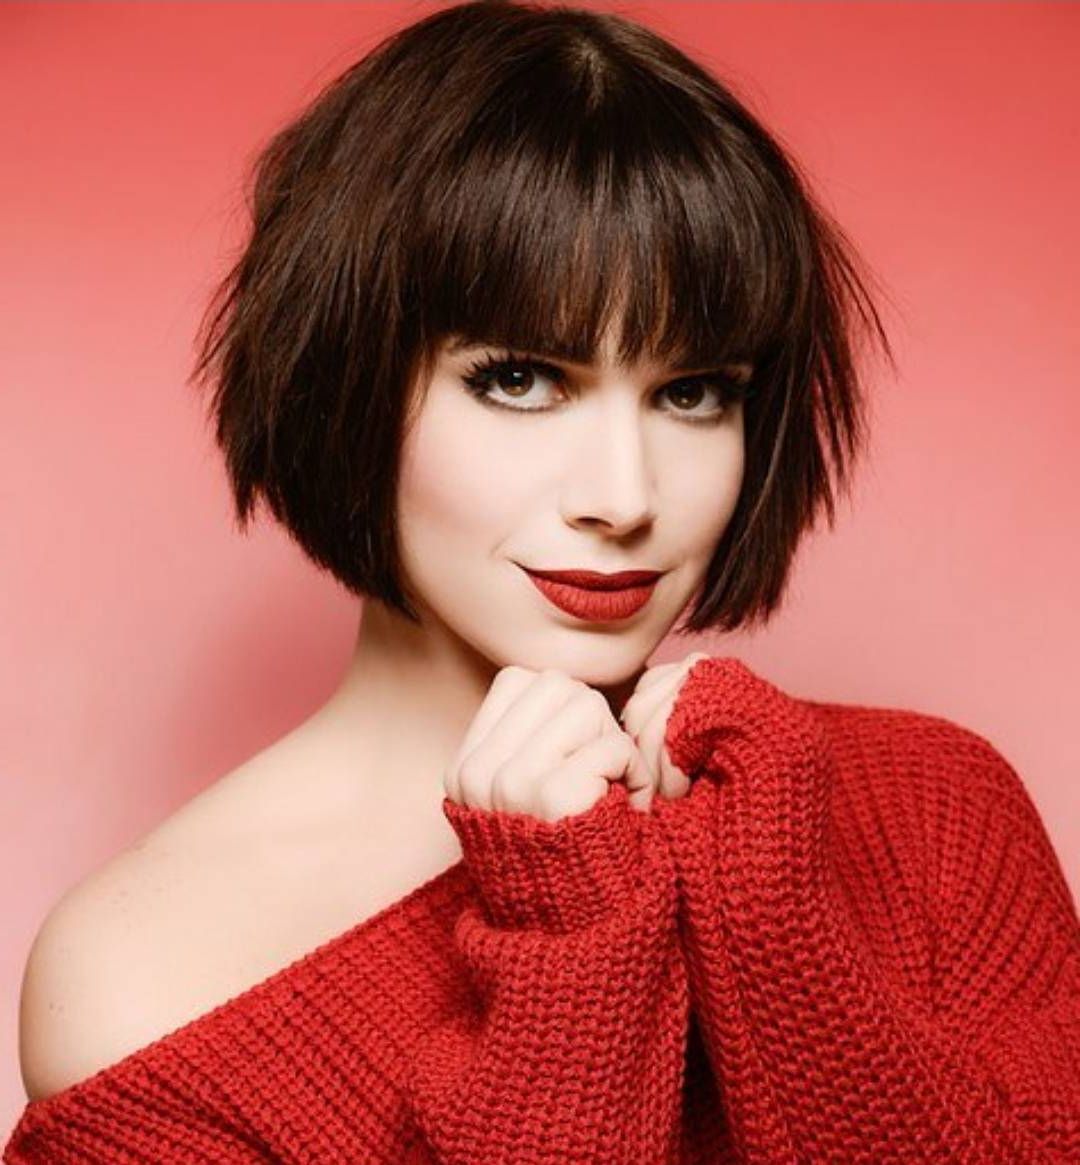 10 Chic Short Bob Haircuts That Balance Your Face Shape! – Short With Regard To Short Haircuts With Bangs For Round Faces (View 25 of 25)